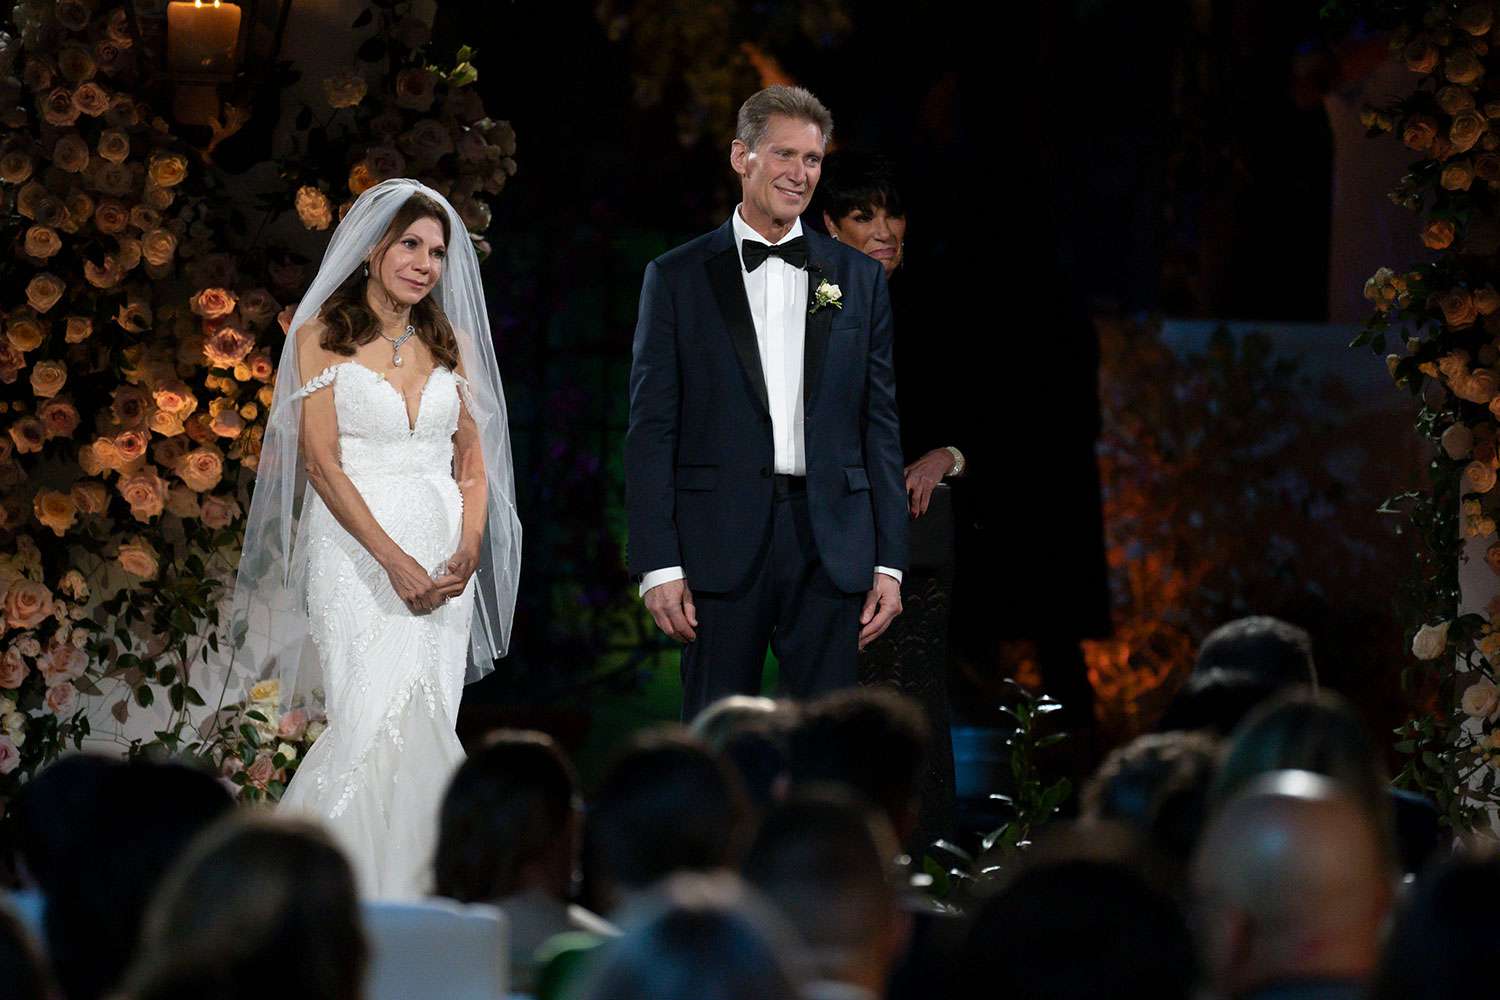 Gerry Turner Marries Theresa Nist In Live Special: A Heartwarming Wedding Ceremony